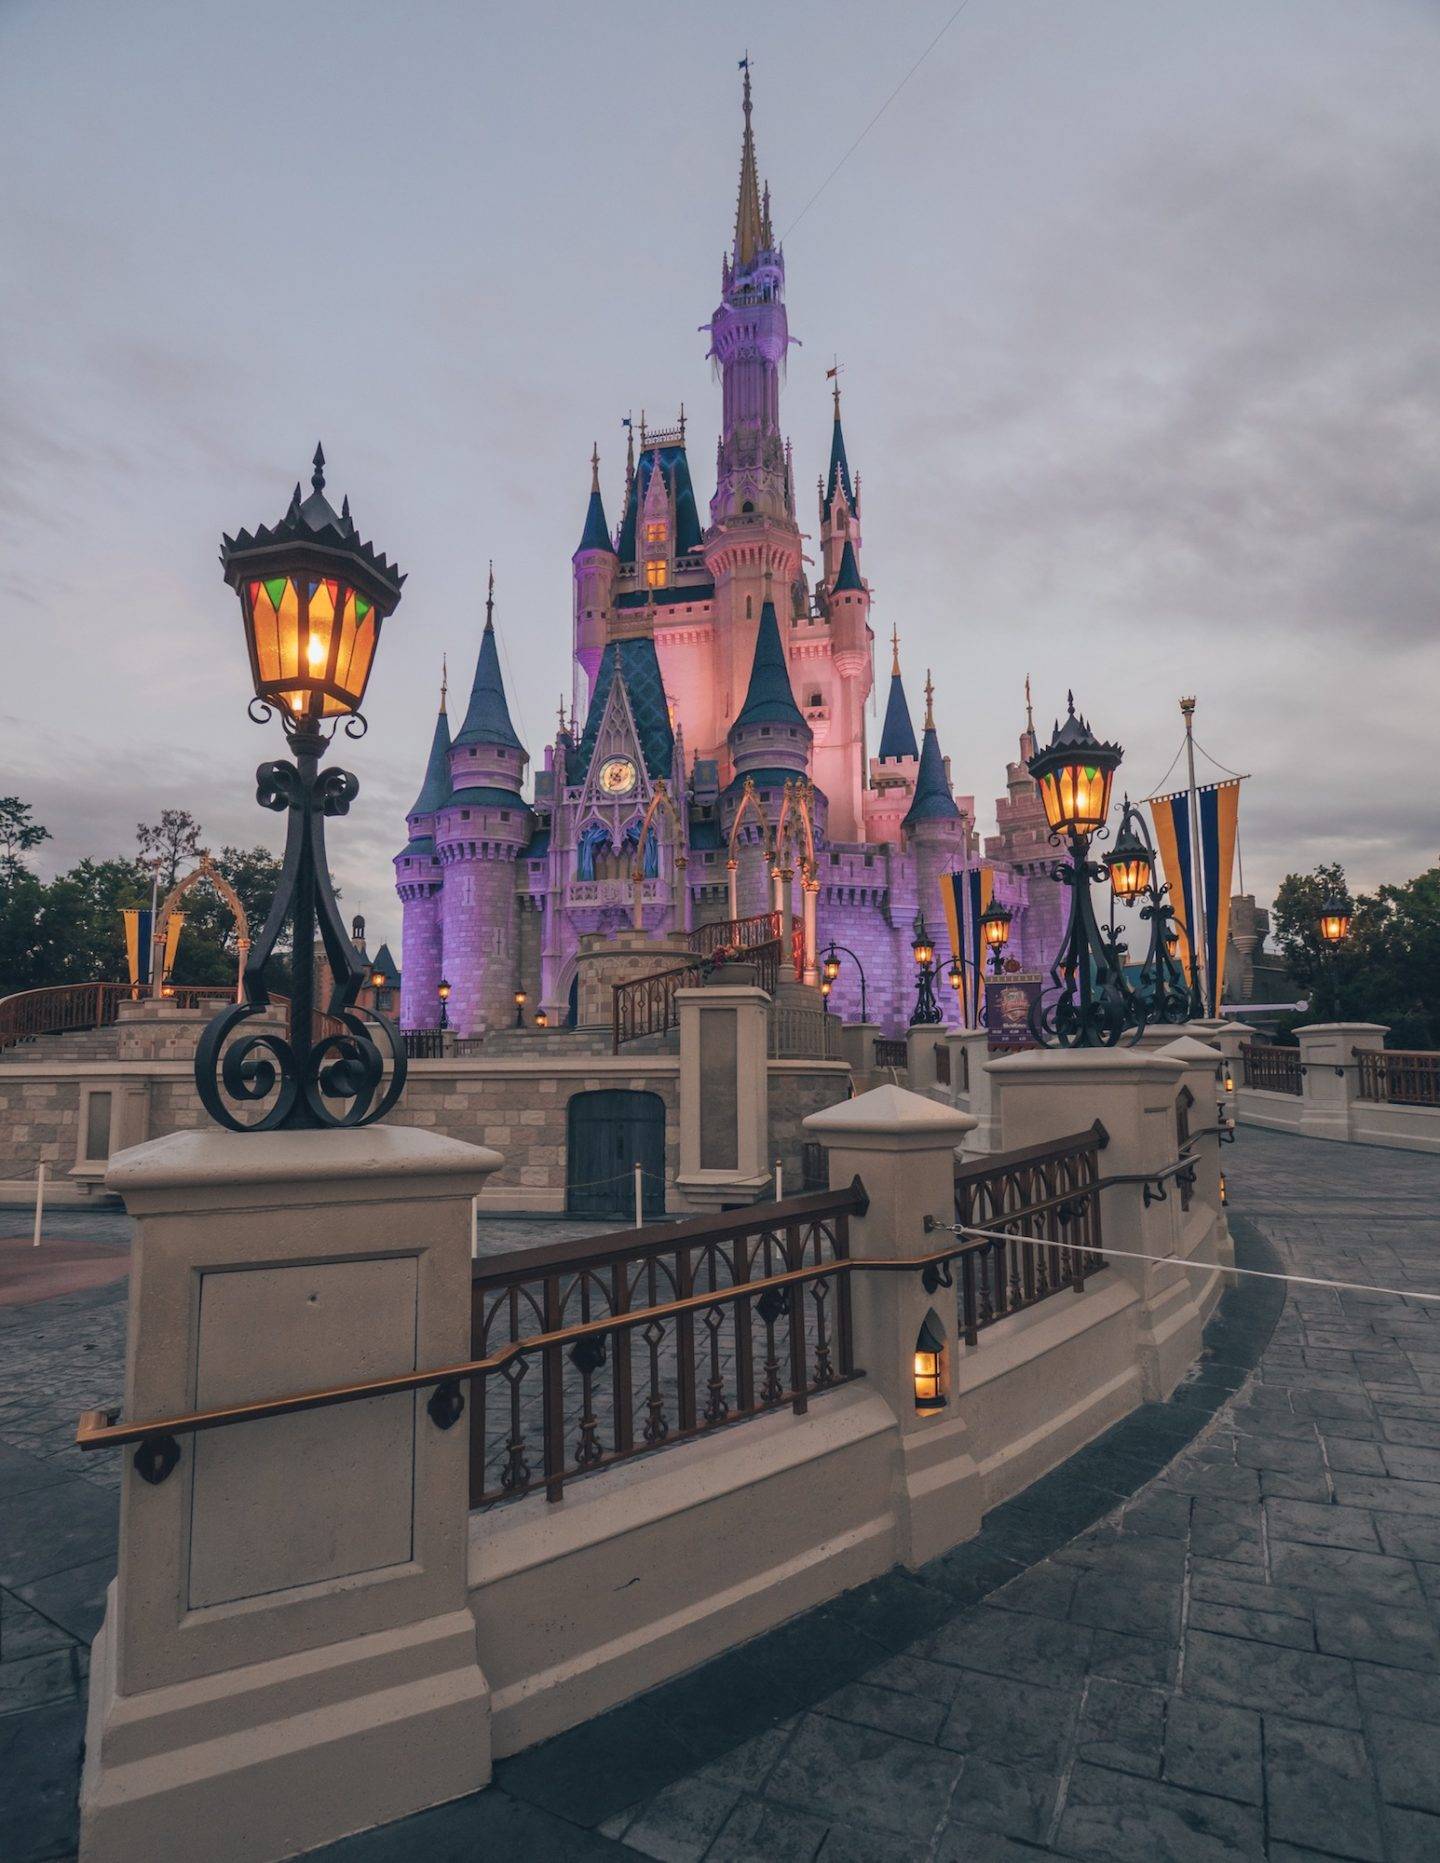 One of the top photo spots in Disney World is Cinderella's castle. Click the photo for a complete guide on how to get the perfect photo at Disney! Includes a list of all the top Disney World photo spots. via www.kirstenwendlandt.com